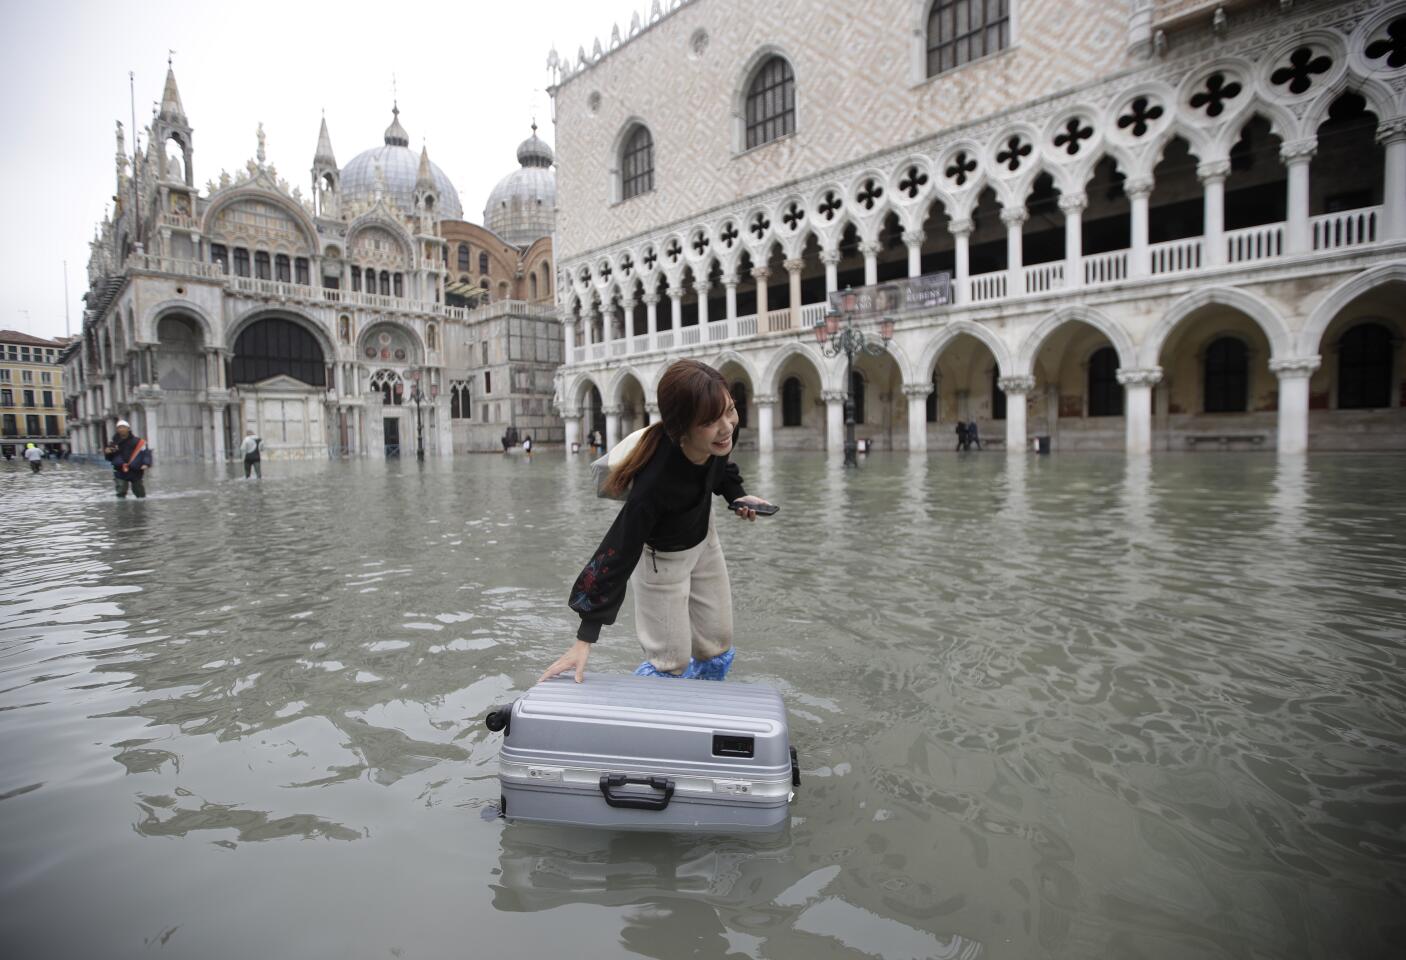 A tourist pushes her floating luggage in a flooded St. Mark's Square in Venice.